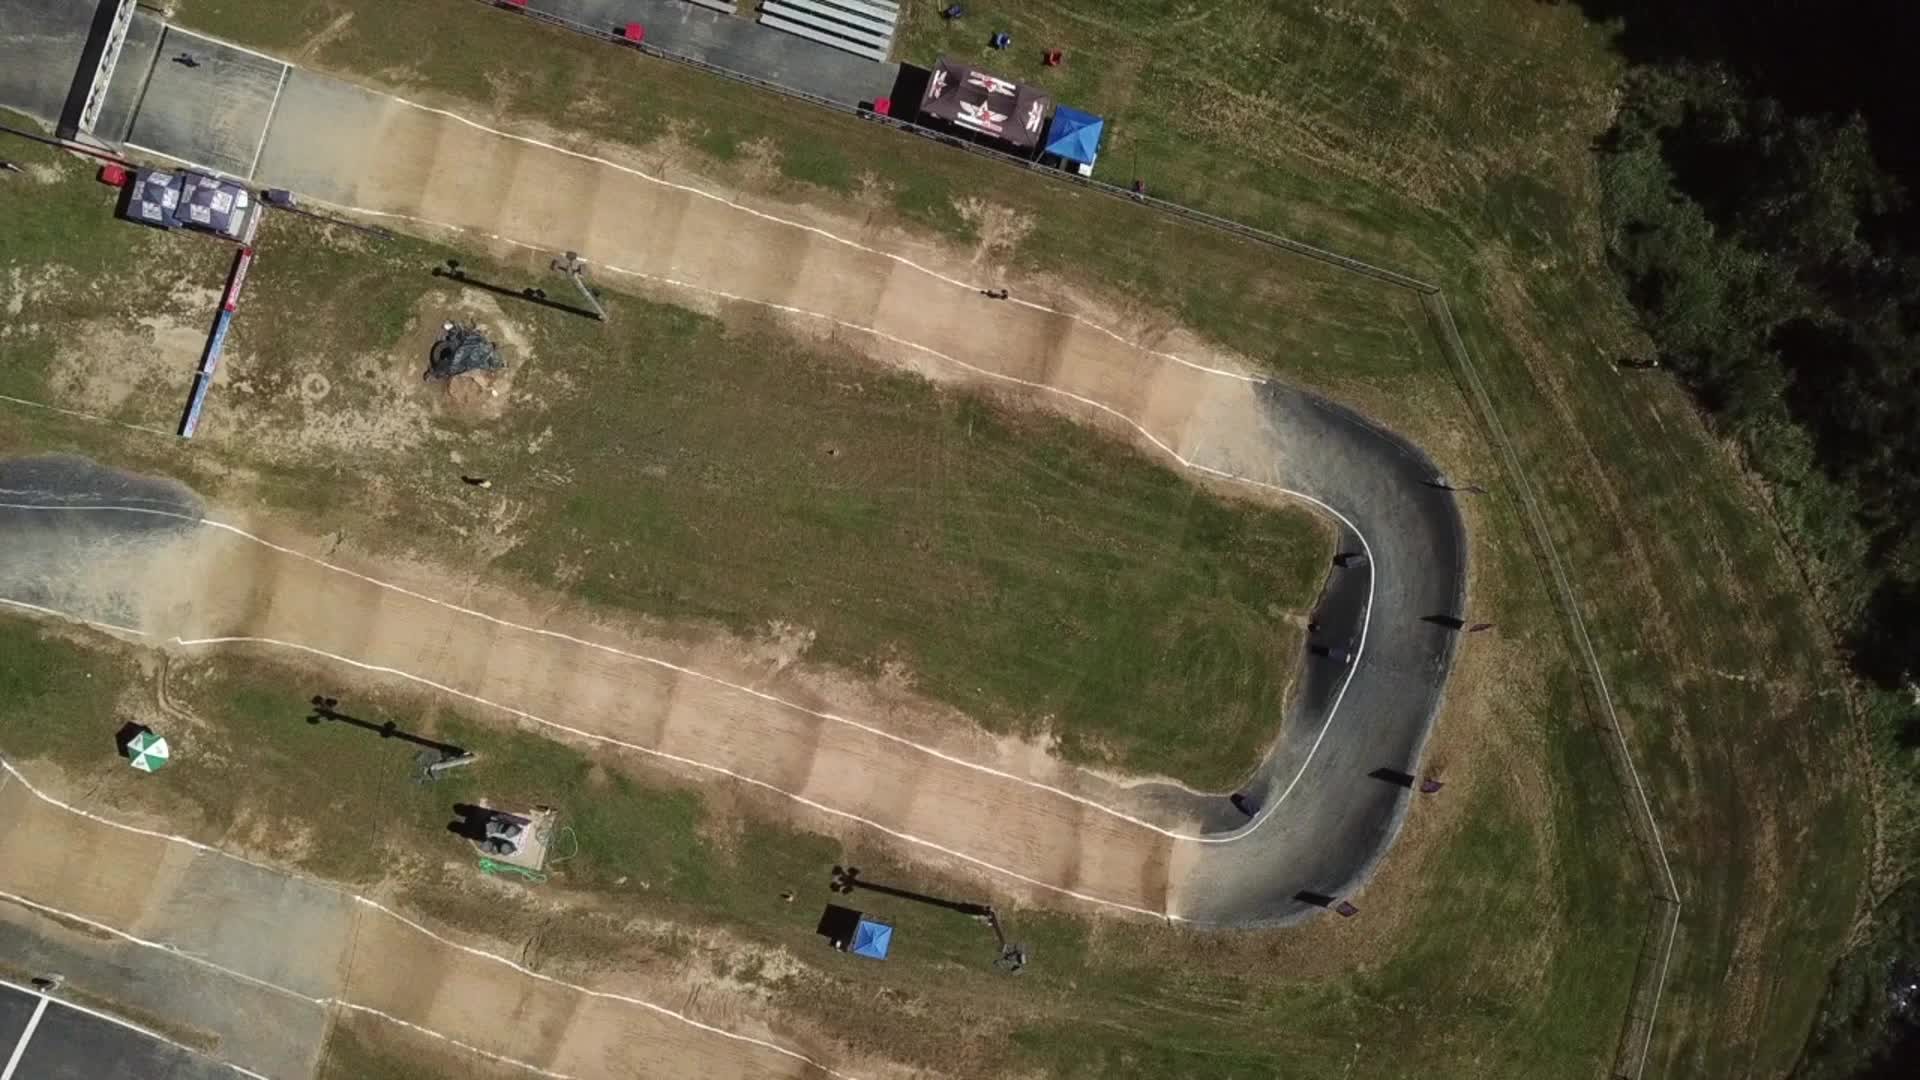 Fly the East Moline BMX race track